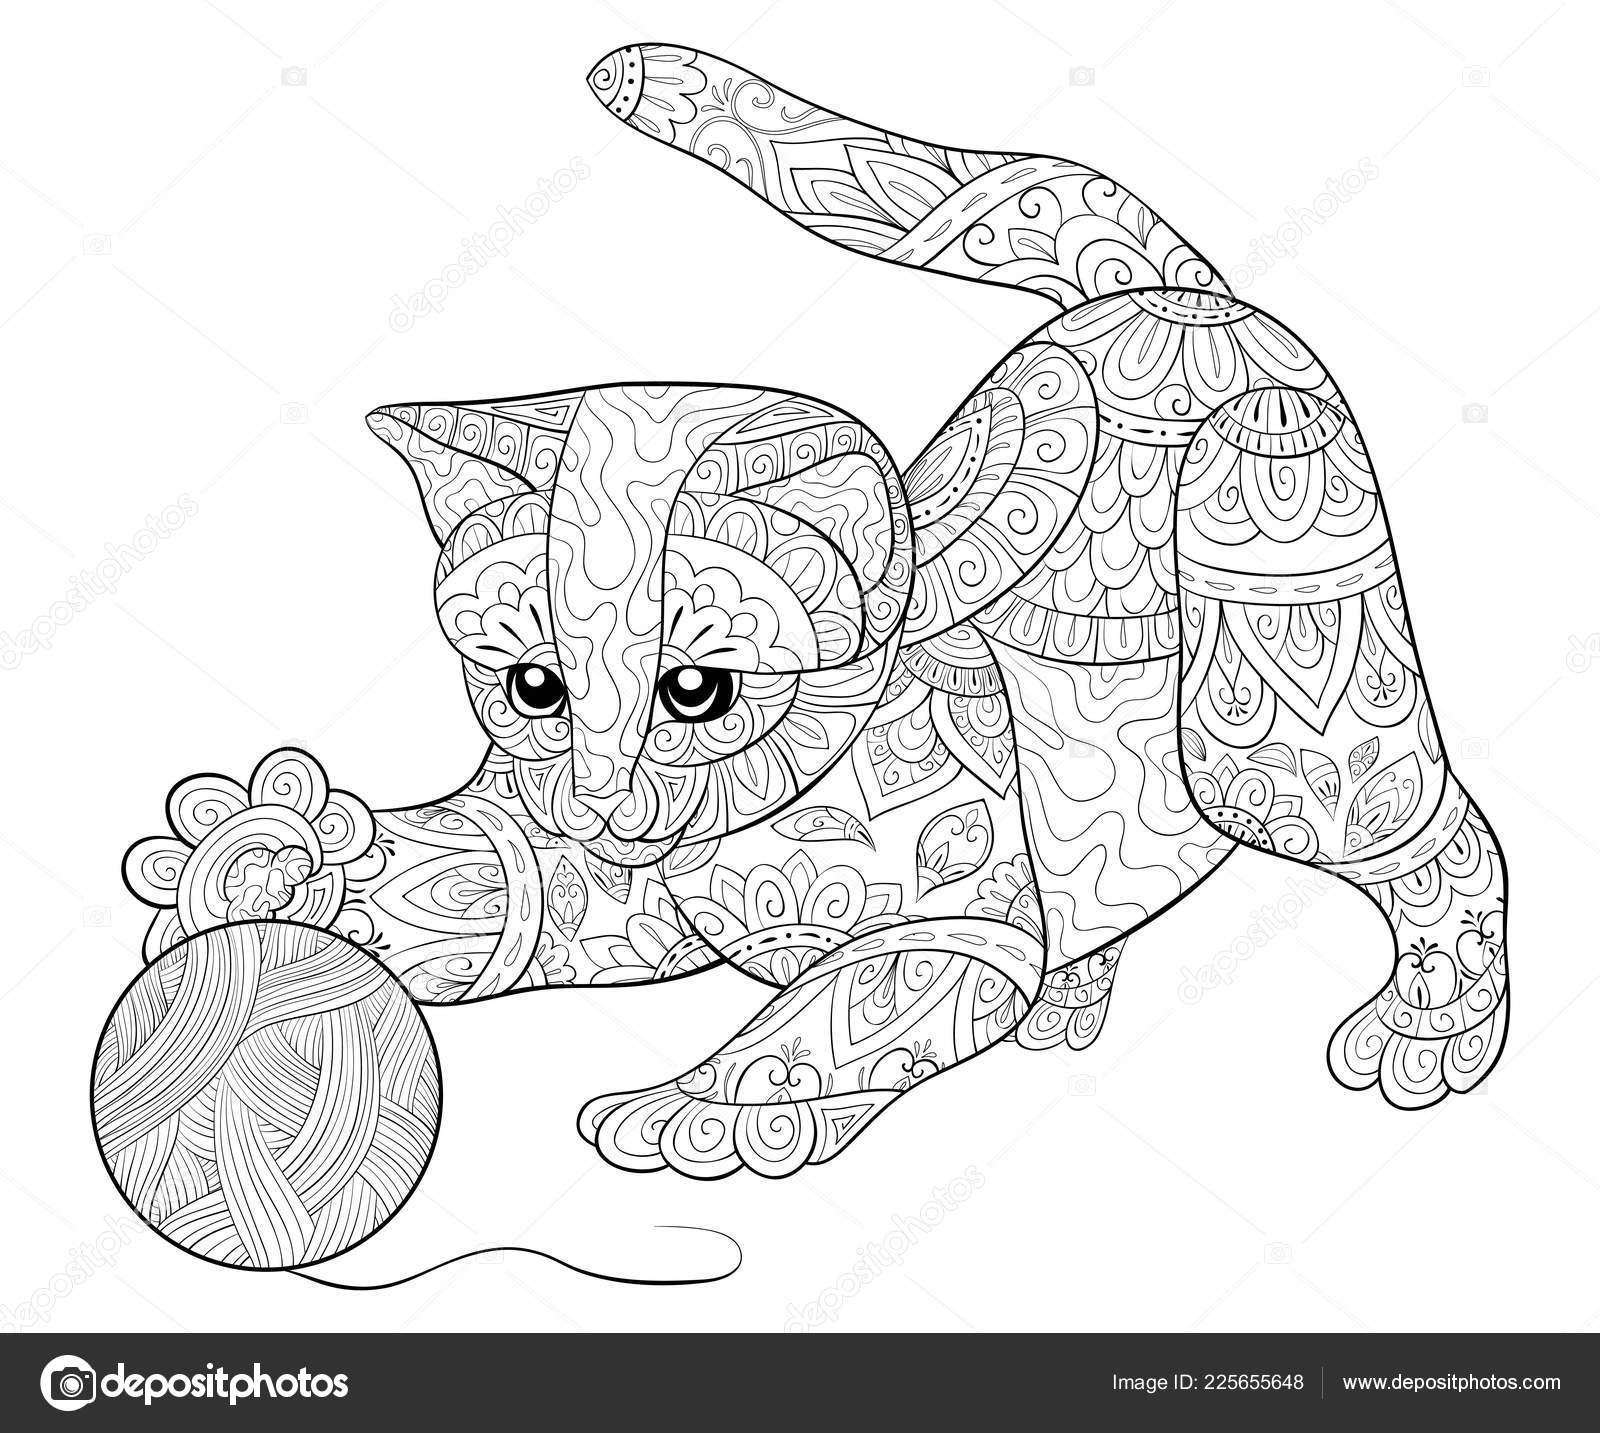 Adult Coloring Book Page Cute Cat Image Relaxing Zen Art Stock Vector by  ©nonuzza 225655786